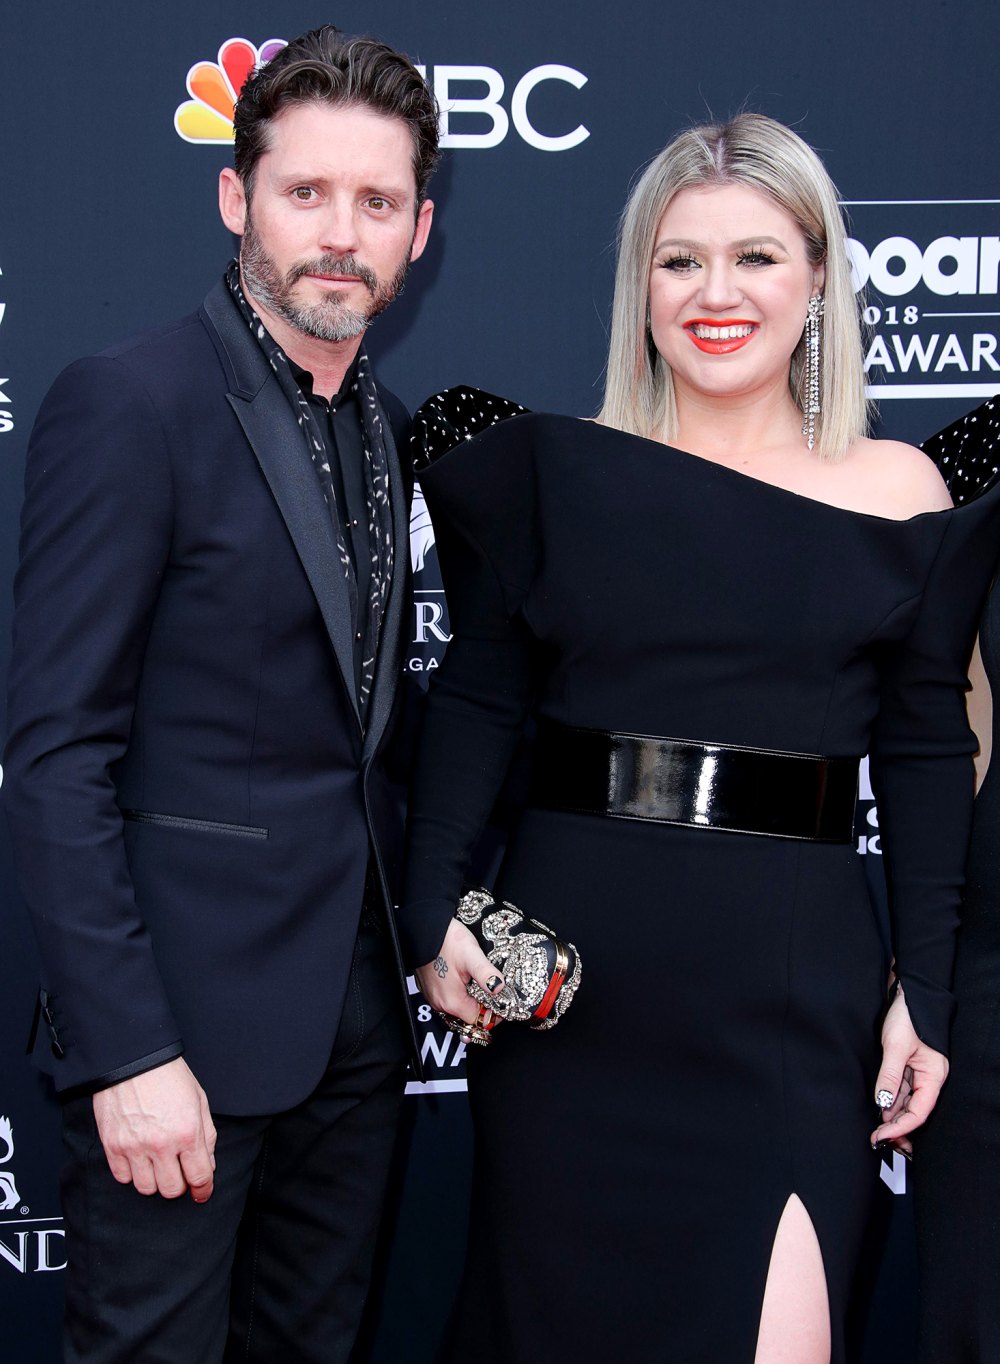 Kelly Clarkson Reveals She Had a 'Little Text Exchange' With Ex-Husband Brandon Blackstock About Her New Album